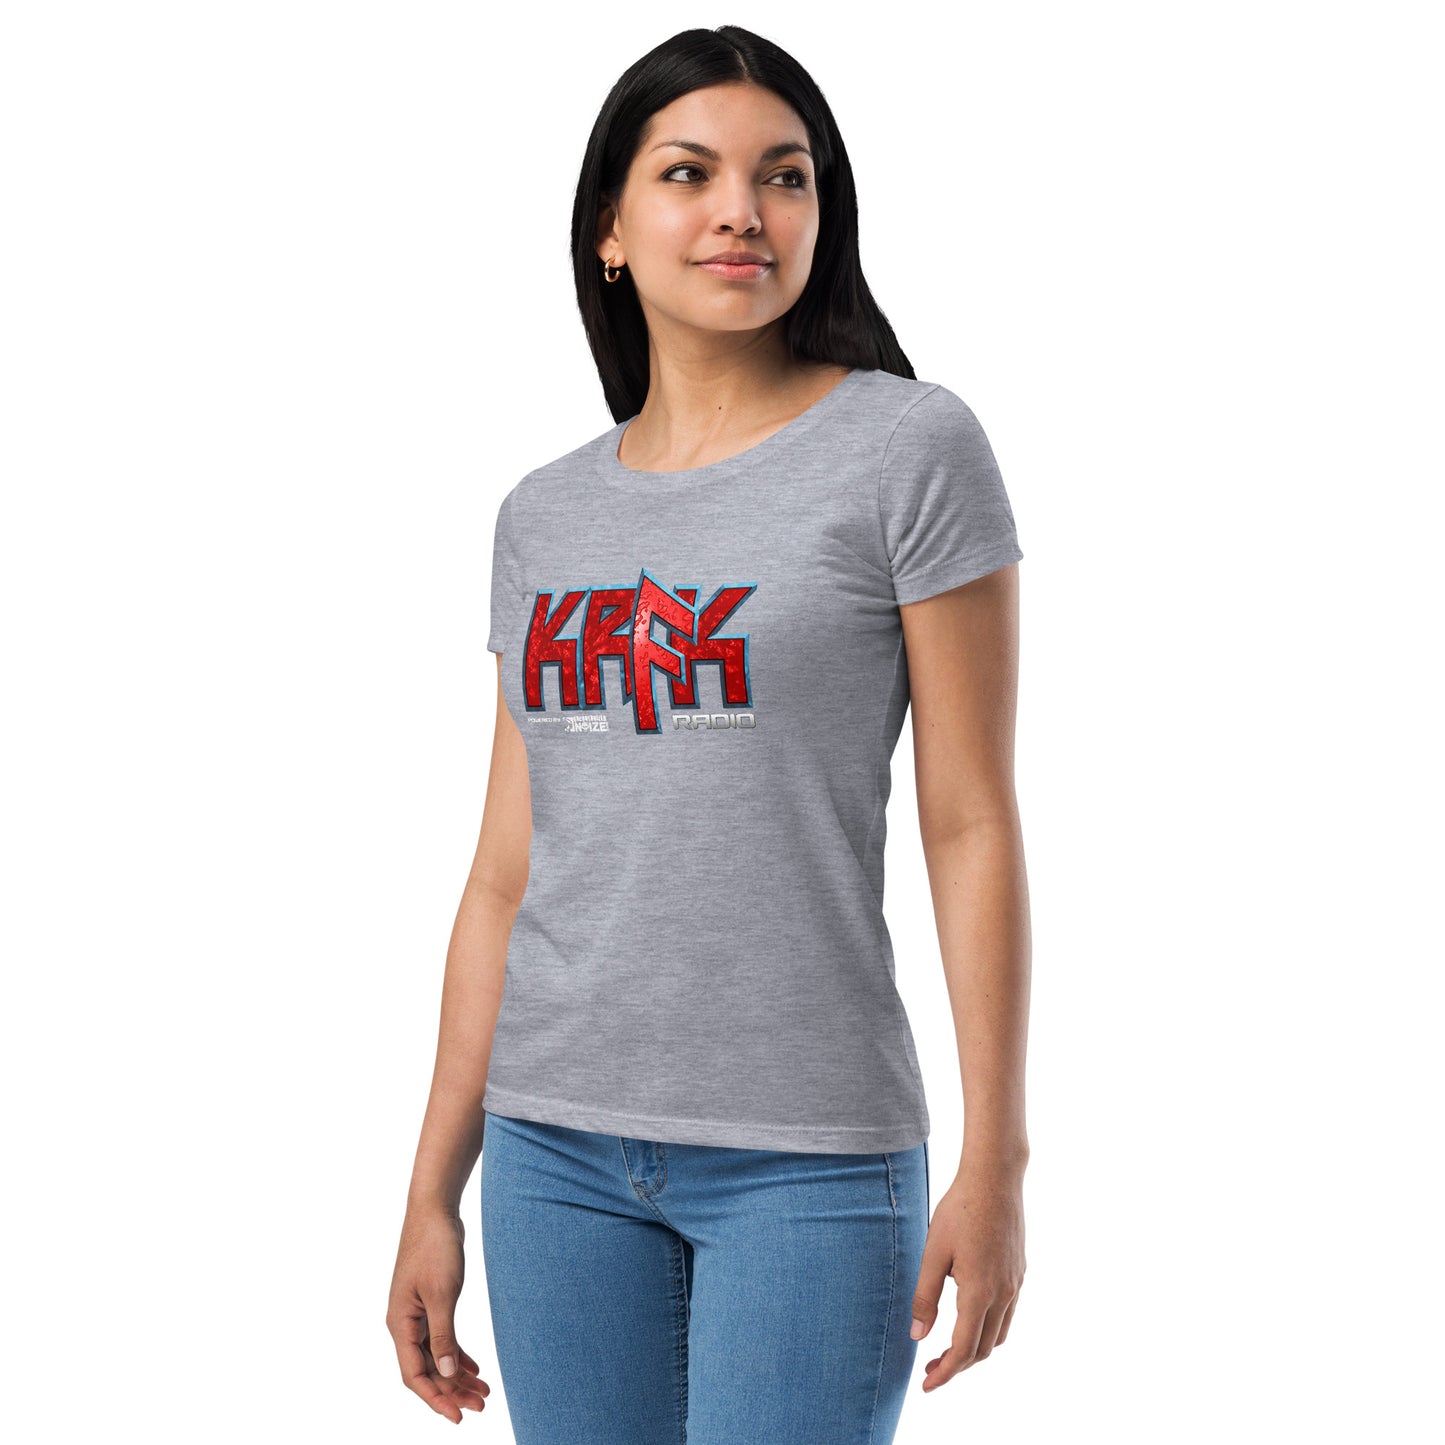 KRFK women’s fitted t-shirt